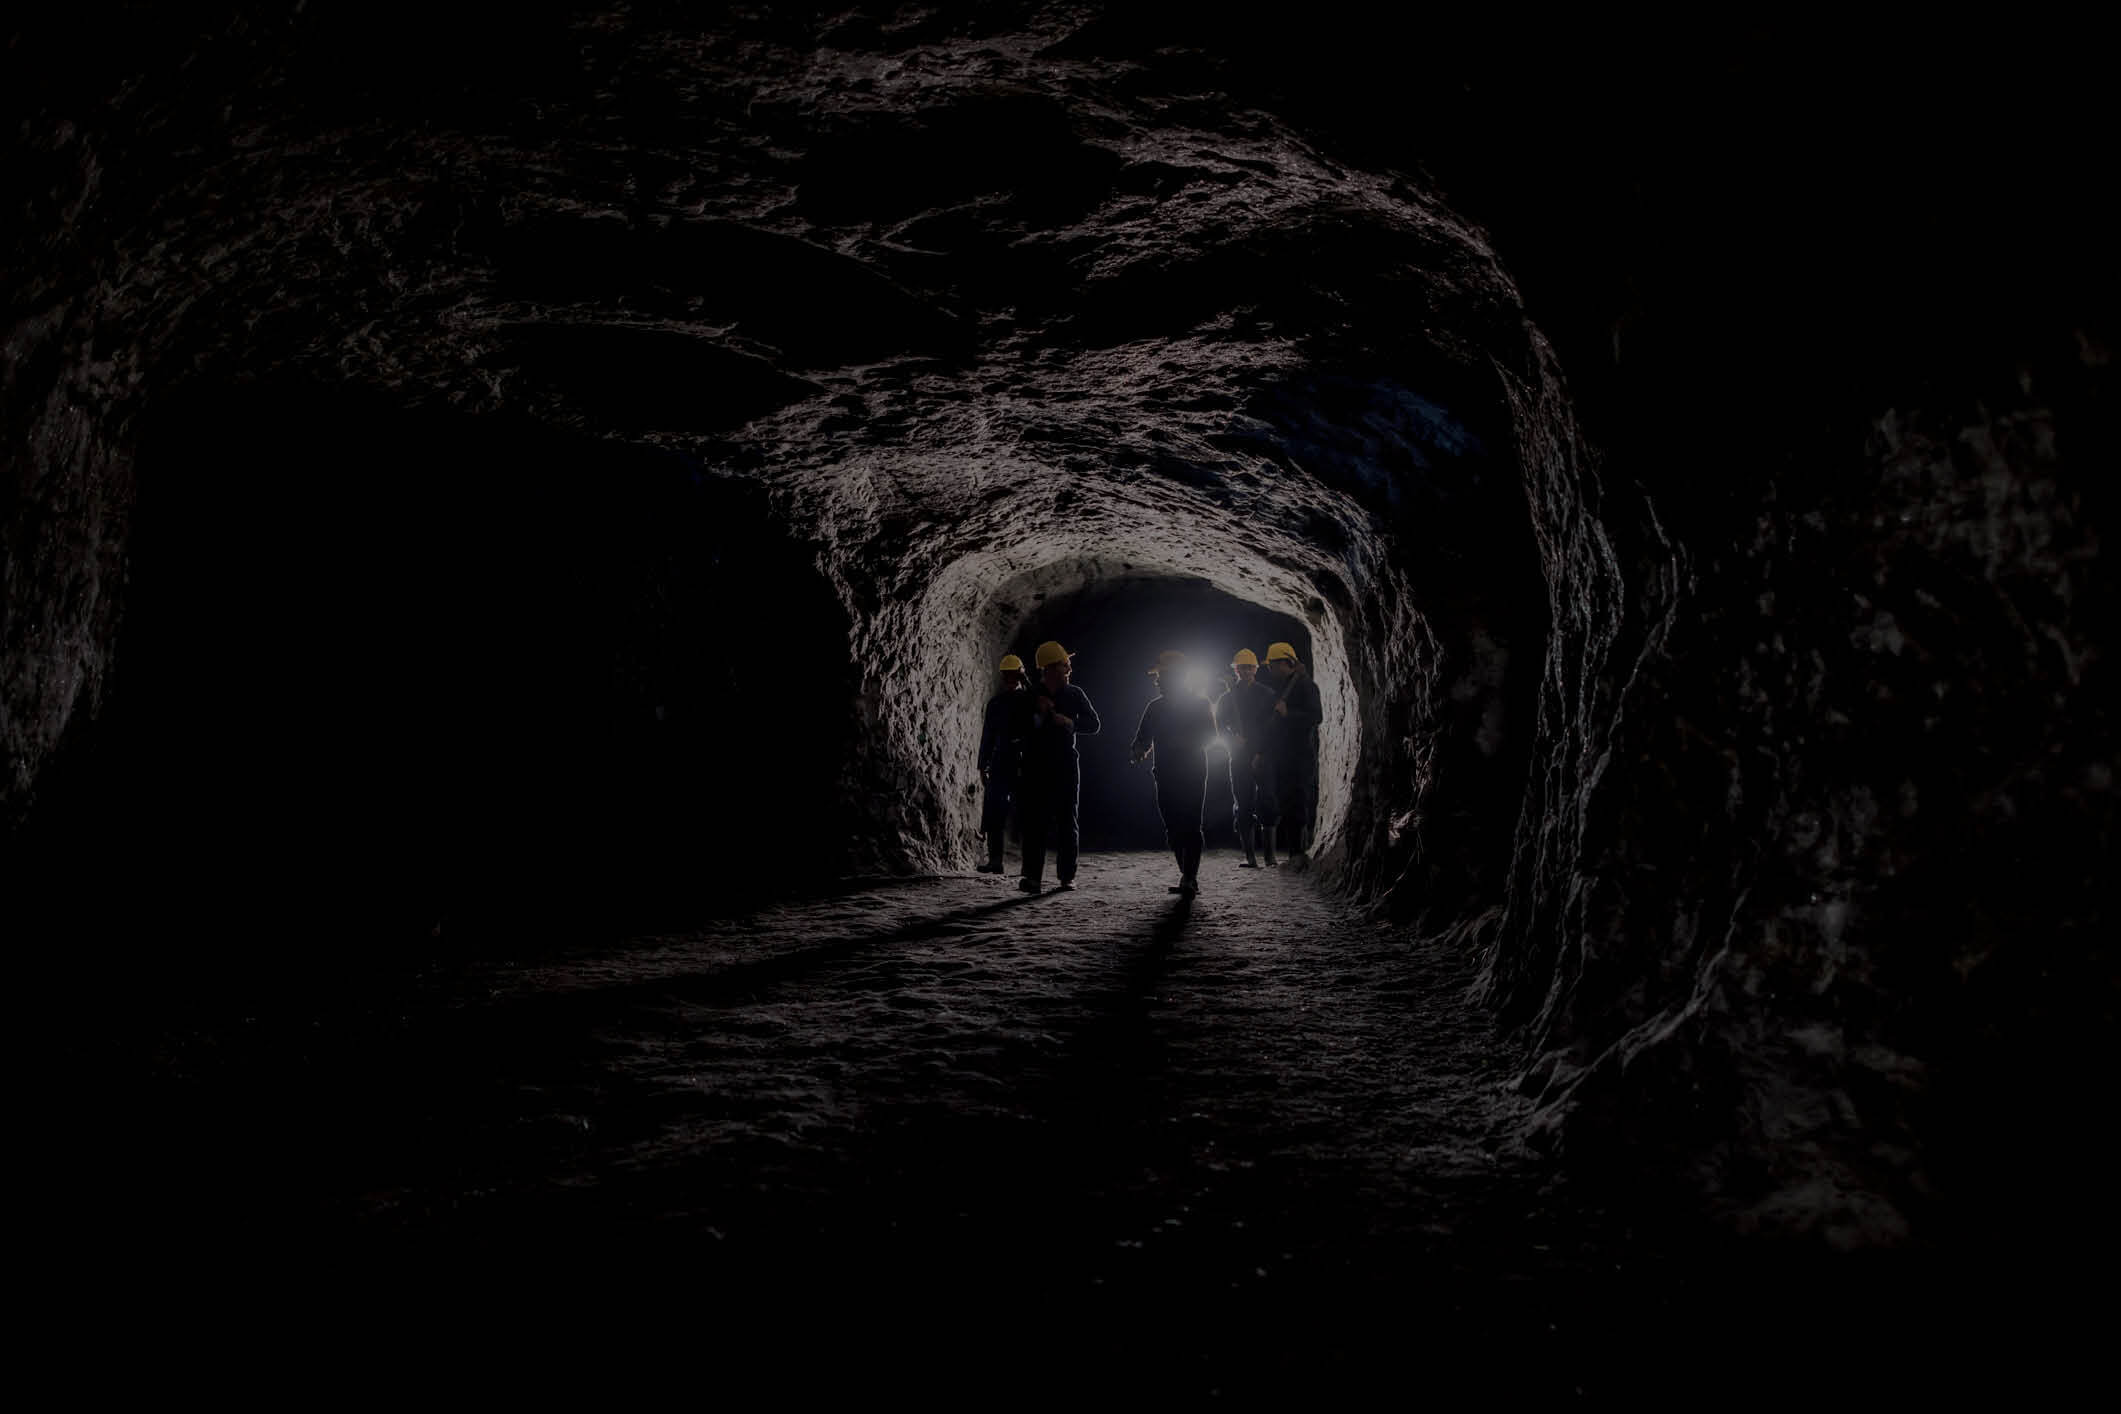 A group equipped with lights and safety gear in an underground mine